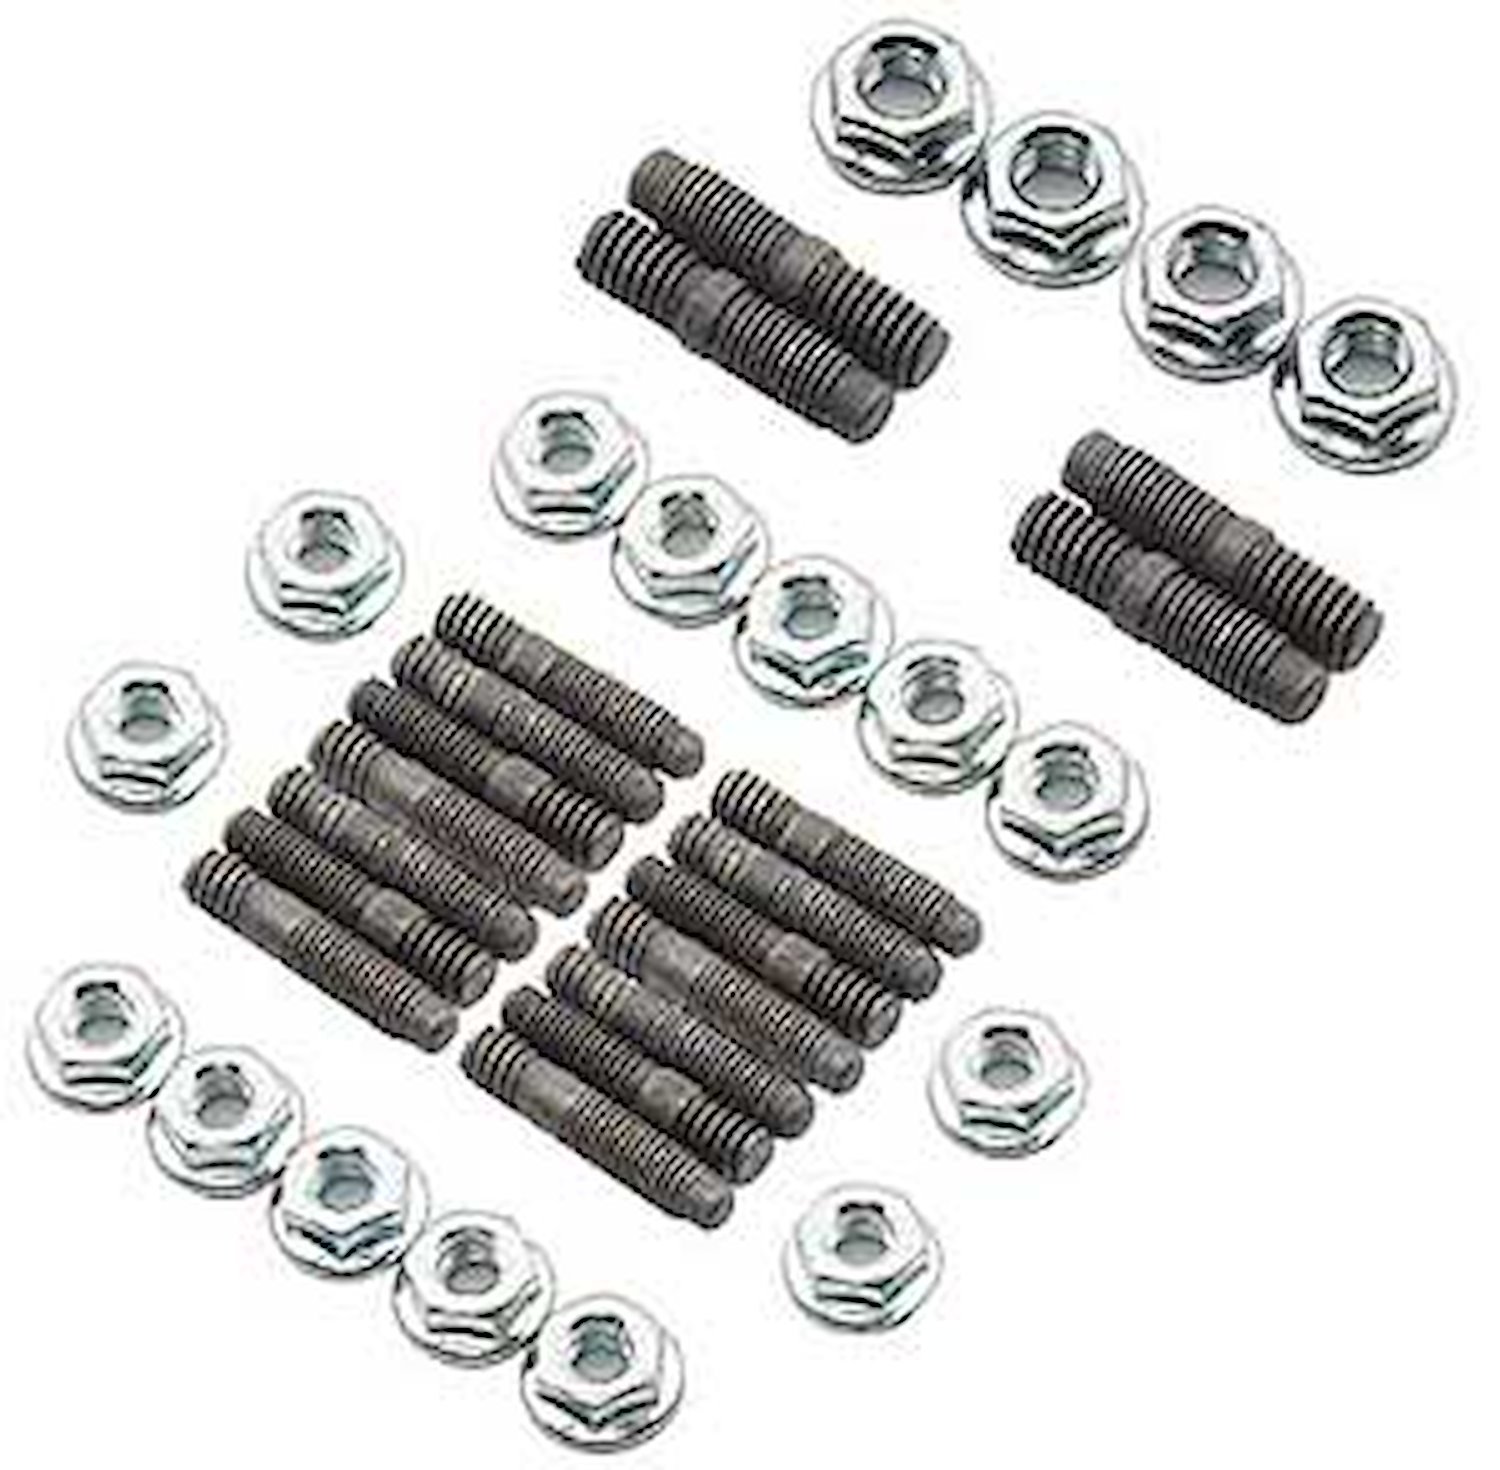 Oil Pan Studs SB-Chevy & 90° V6, Olds V8 Includes: (14) 1/4" -20/28 x 1-1/8" and (4) 5/16" -18/24 x 1-5/16" Studs and Nuts